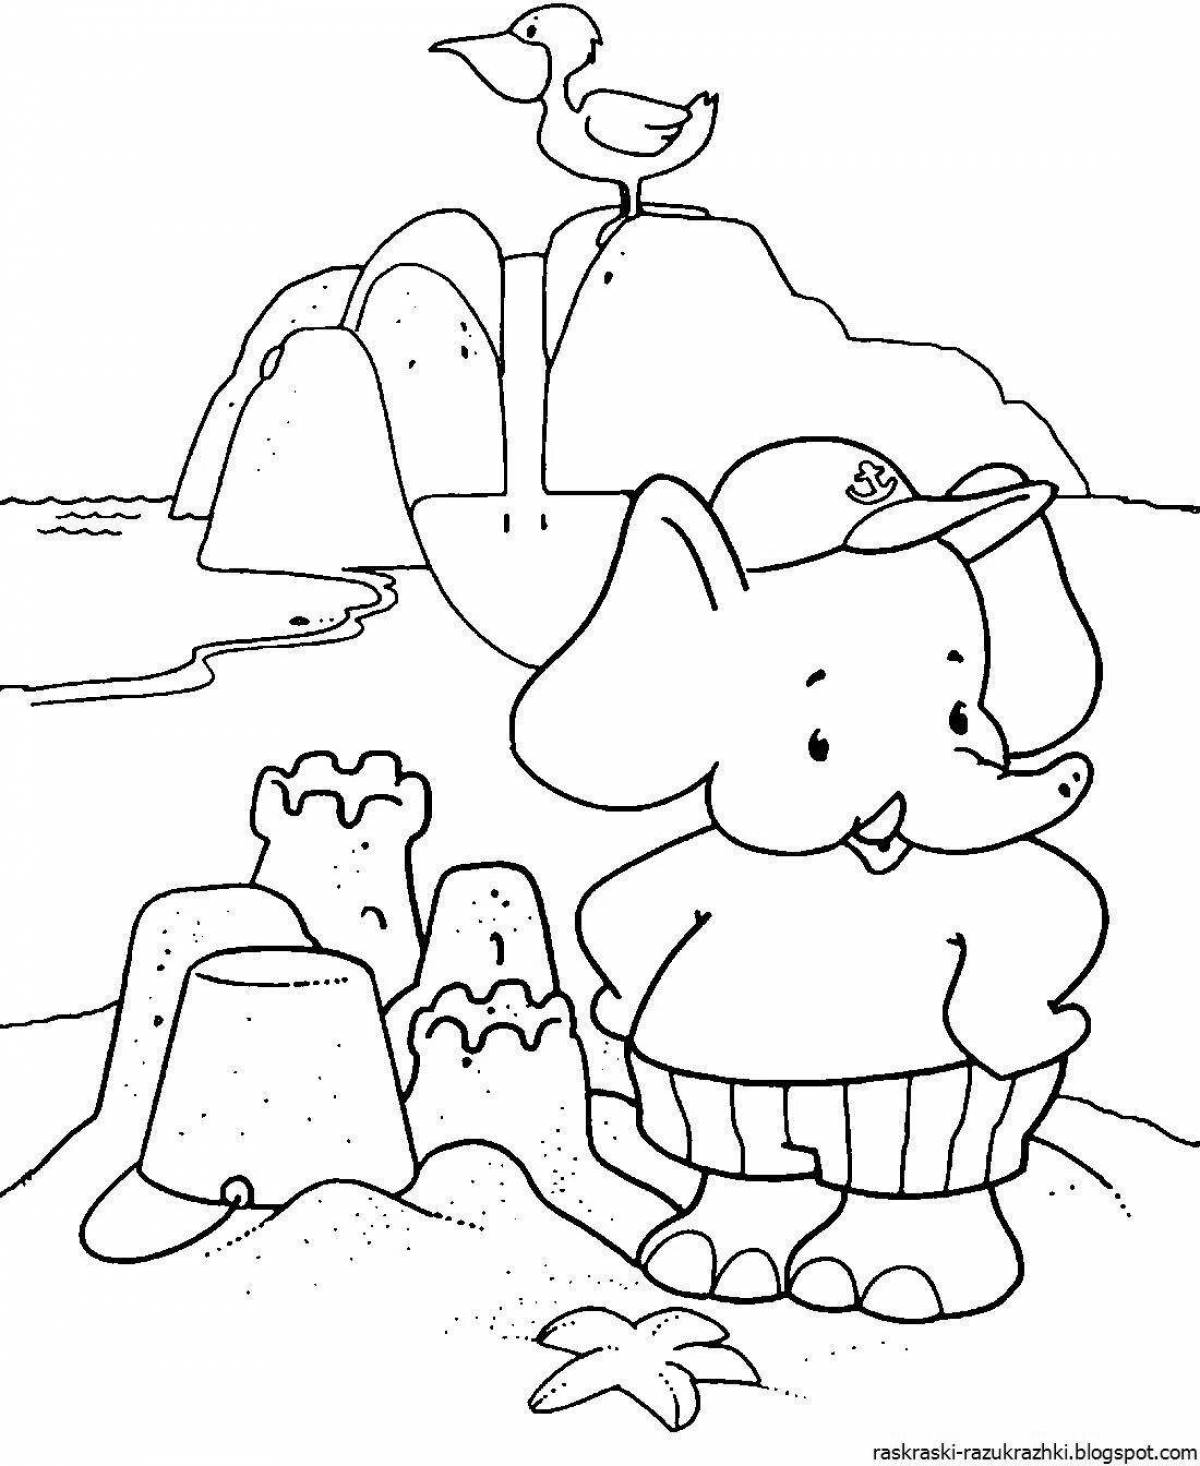 Sand play coloring book